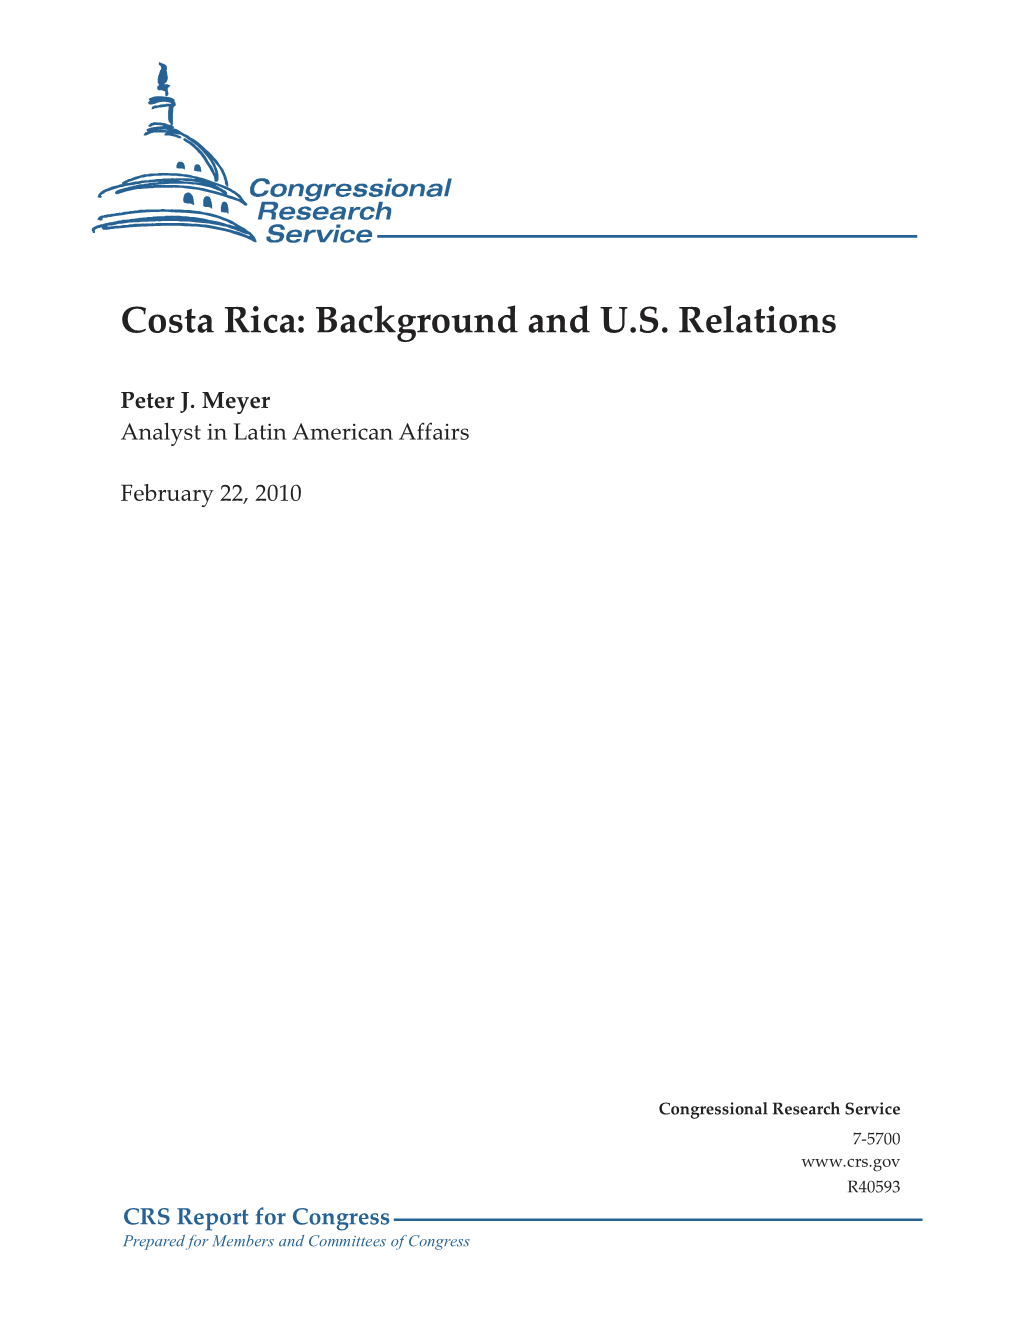 Costa Rica: Background and US Relations